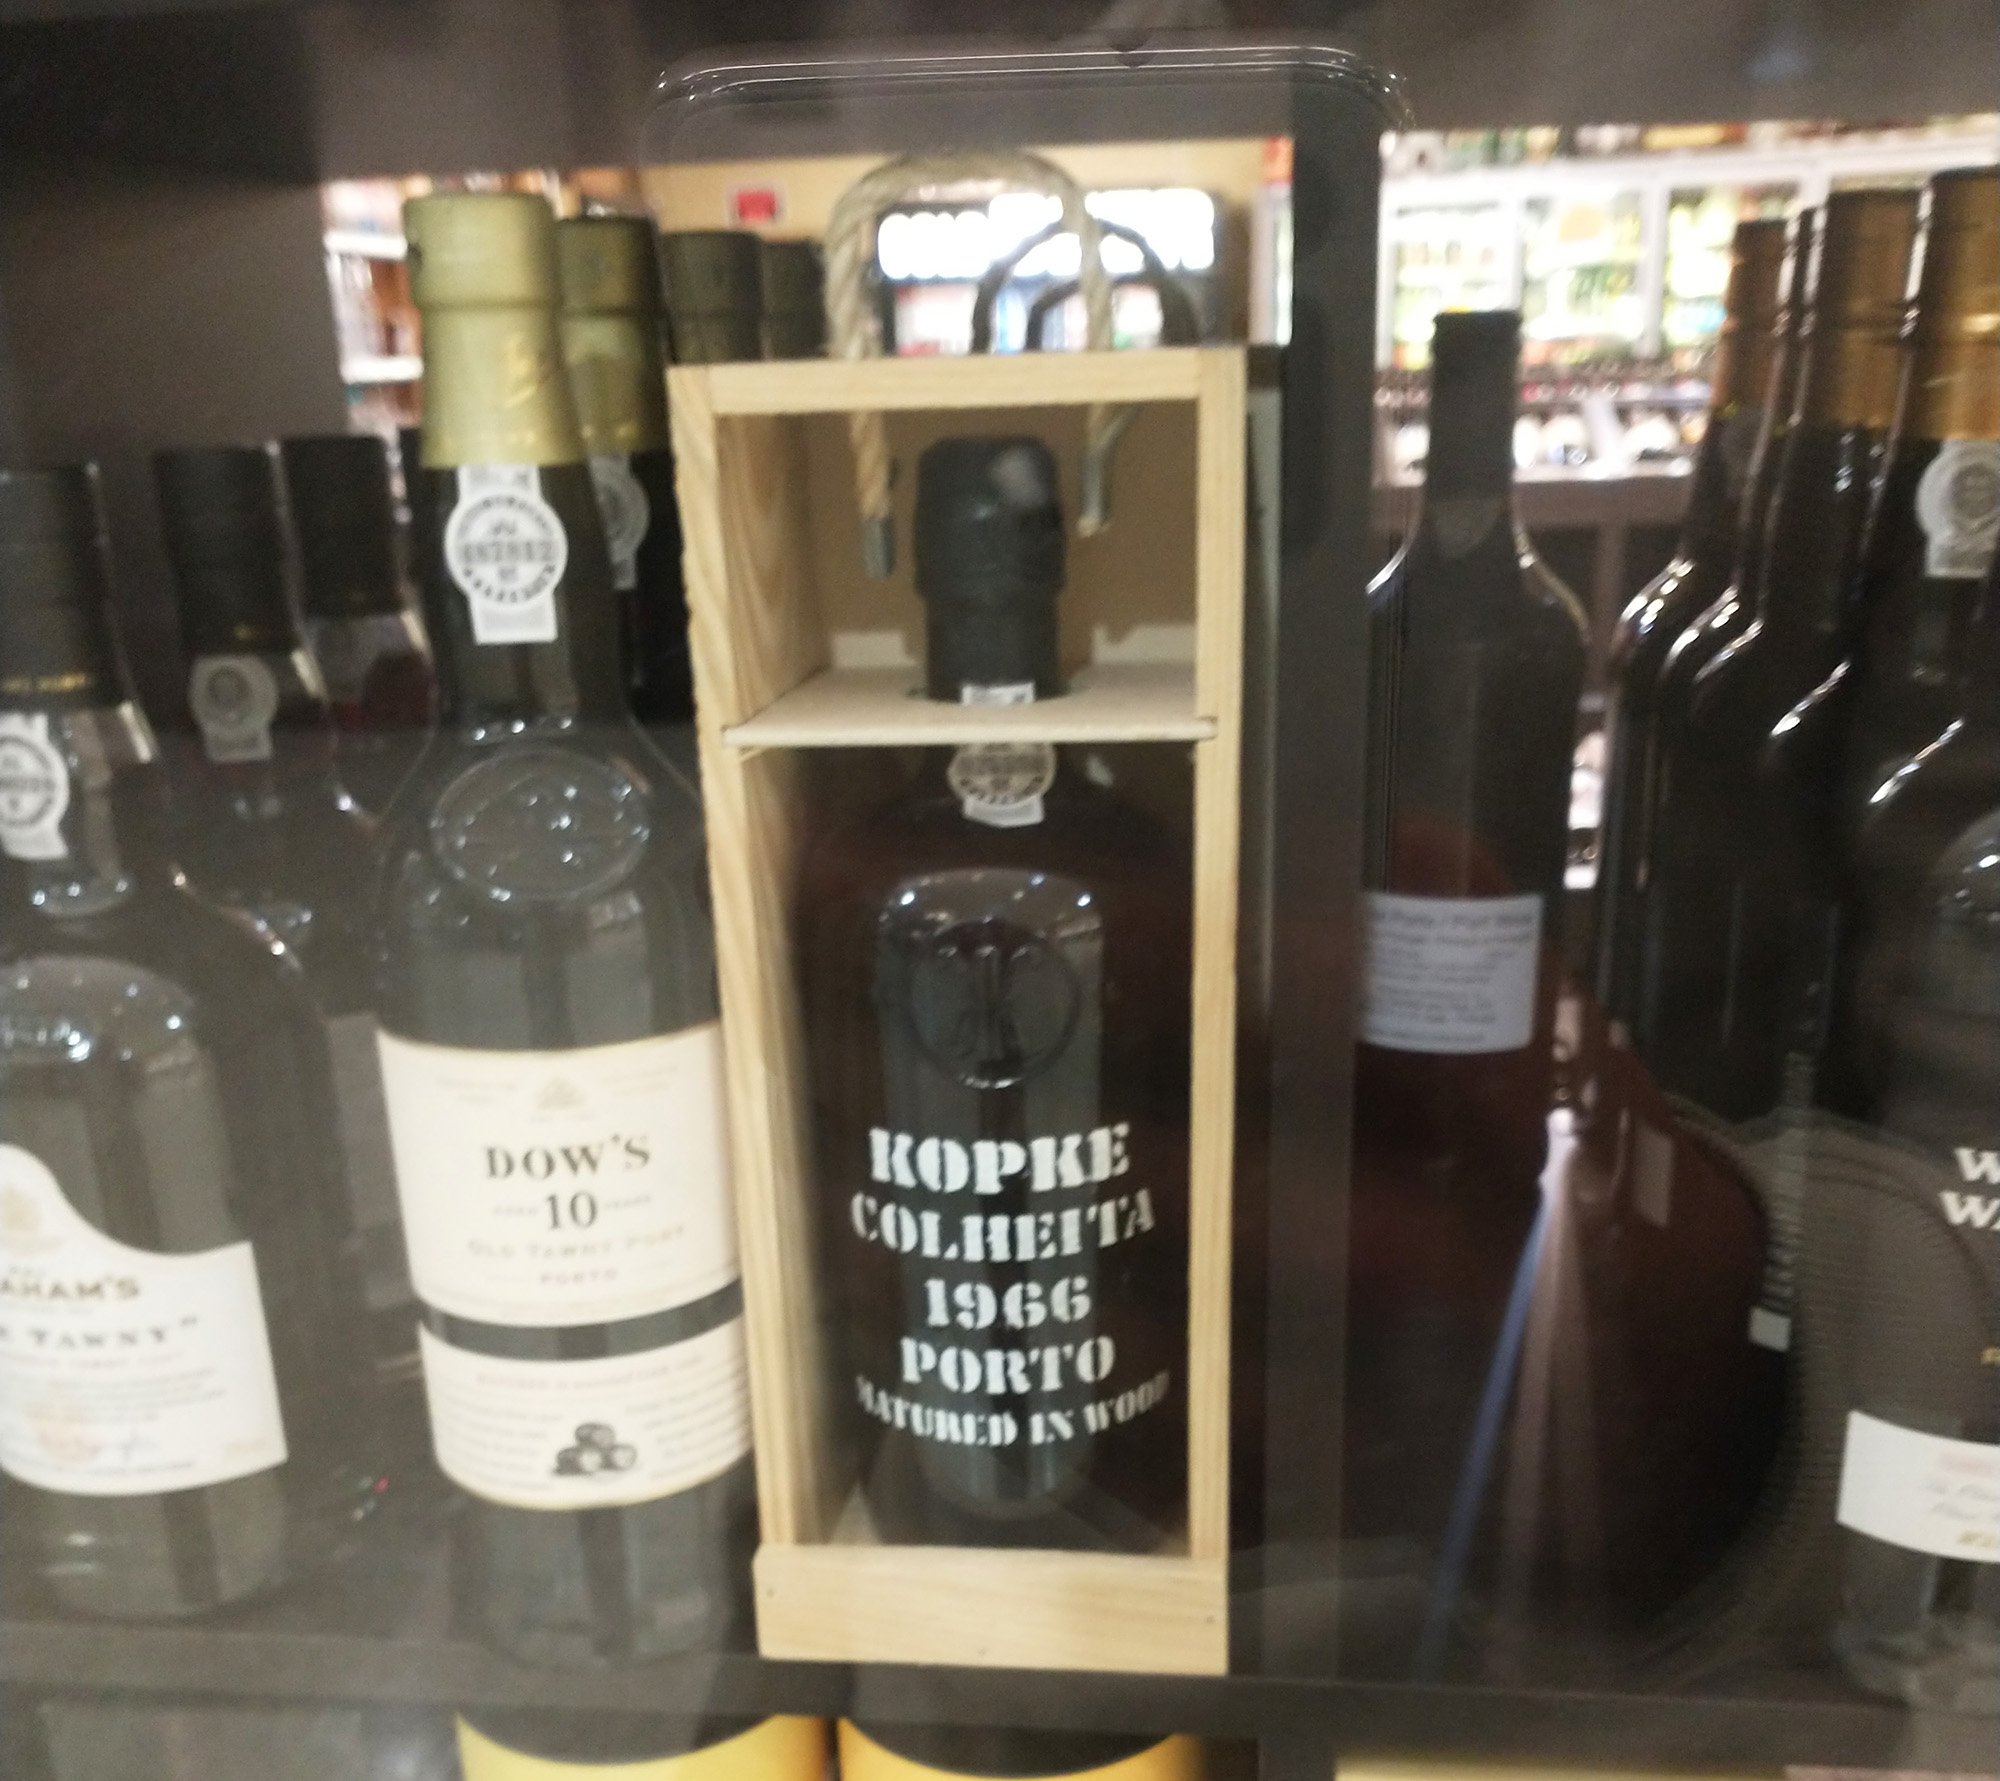 Almost 60 year old Port at the liquor store :O